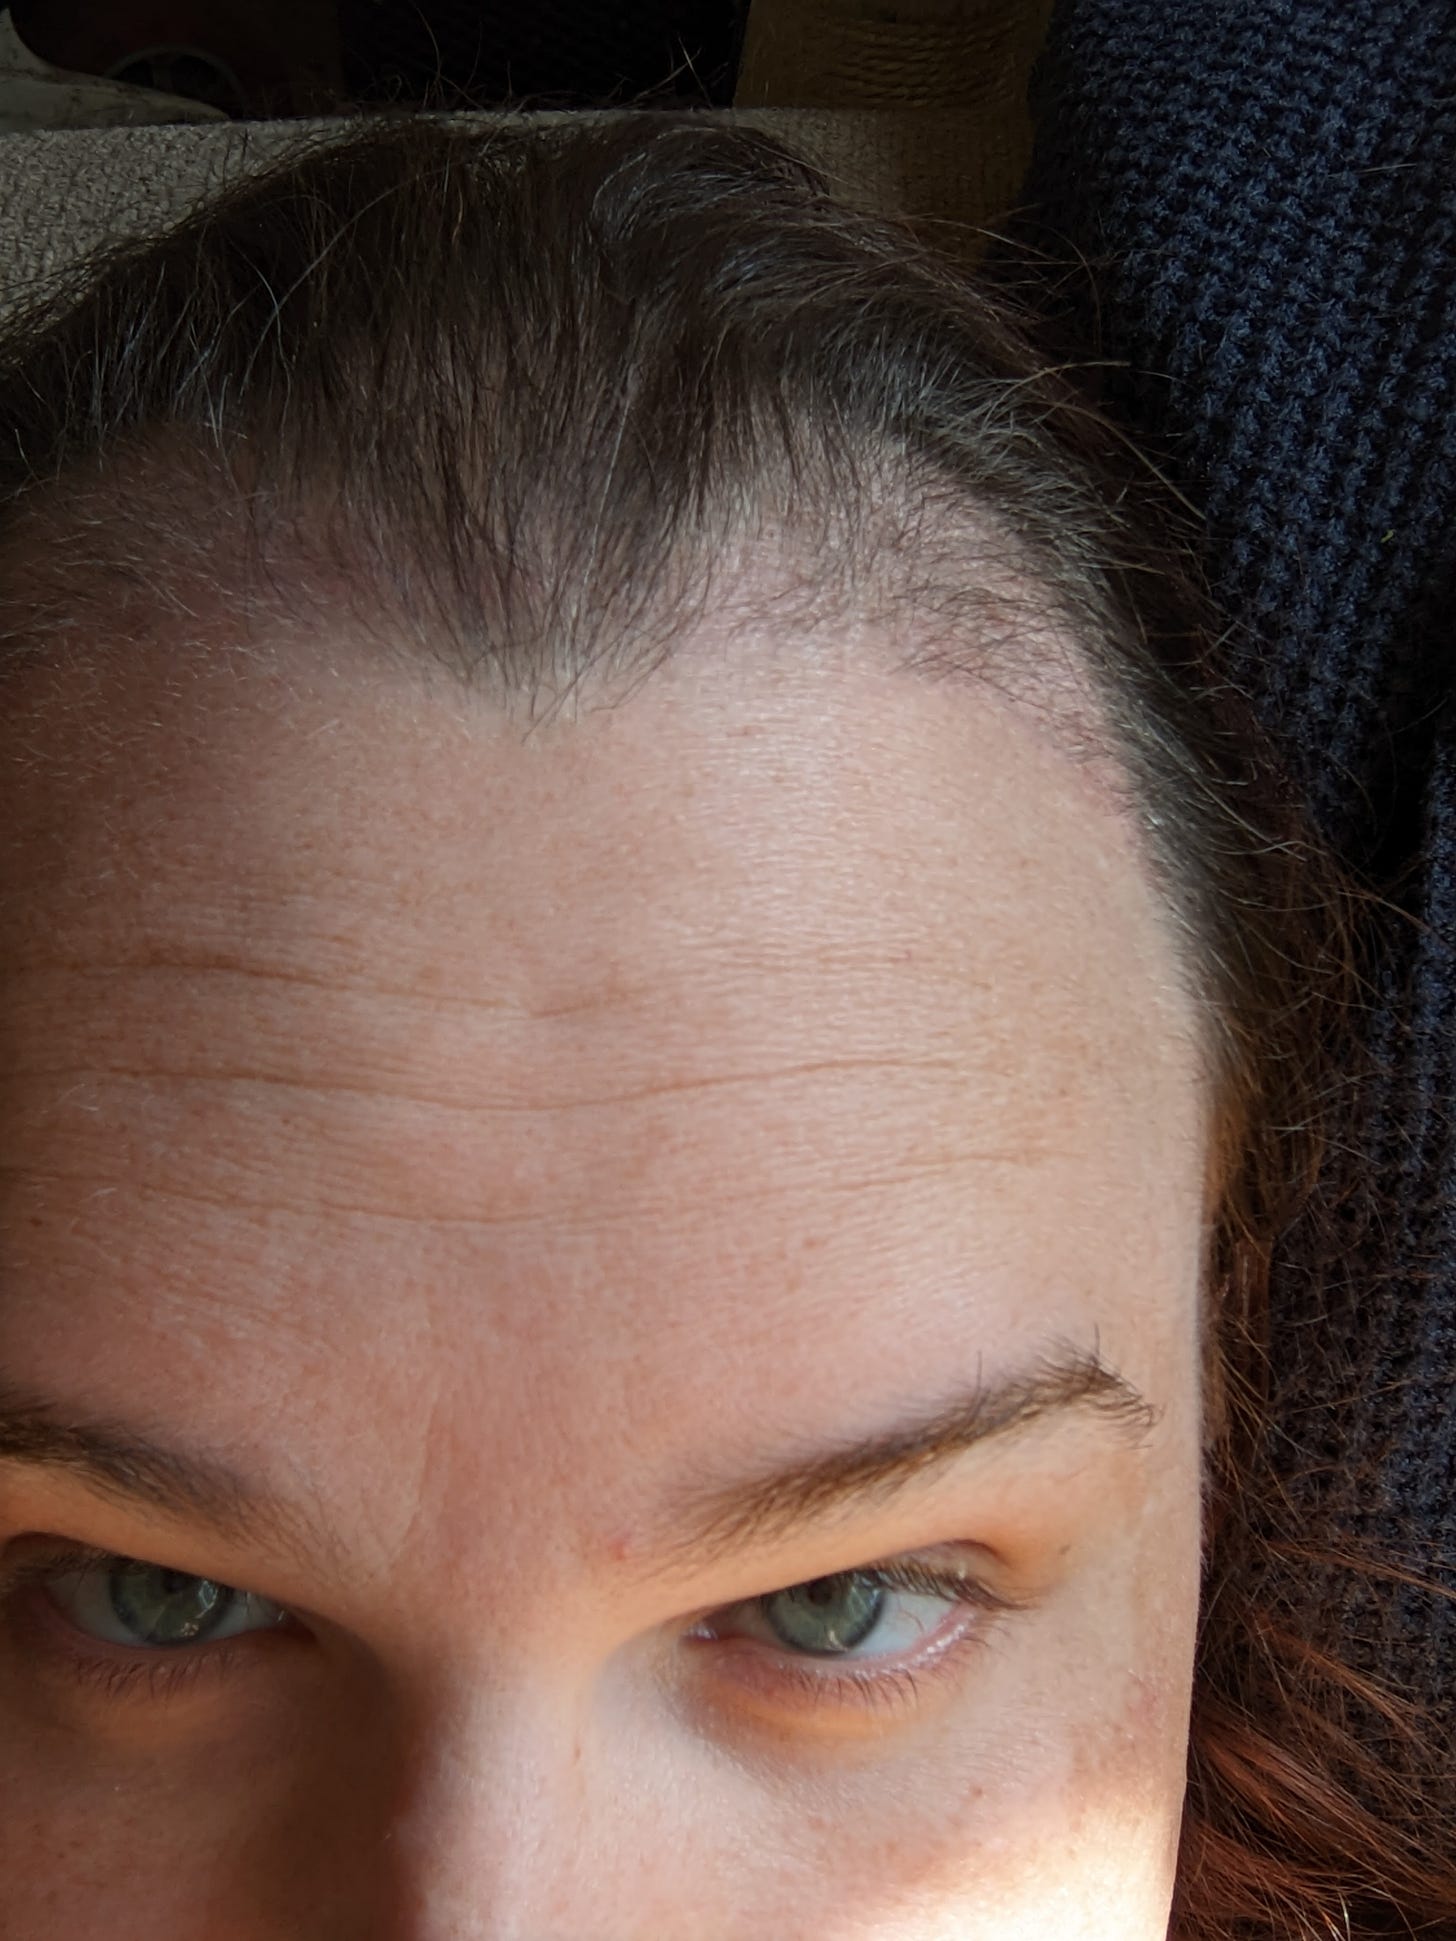 A close-up of Doc Impossible's brow and hairline at 3 months post-op. A vague tufting of hair remains in the transplanted area. Her brow is droopy, and looks a lot like it did before her FFS.